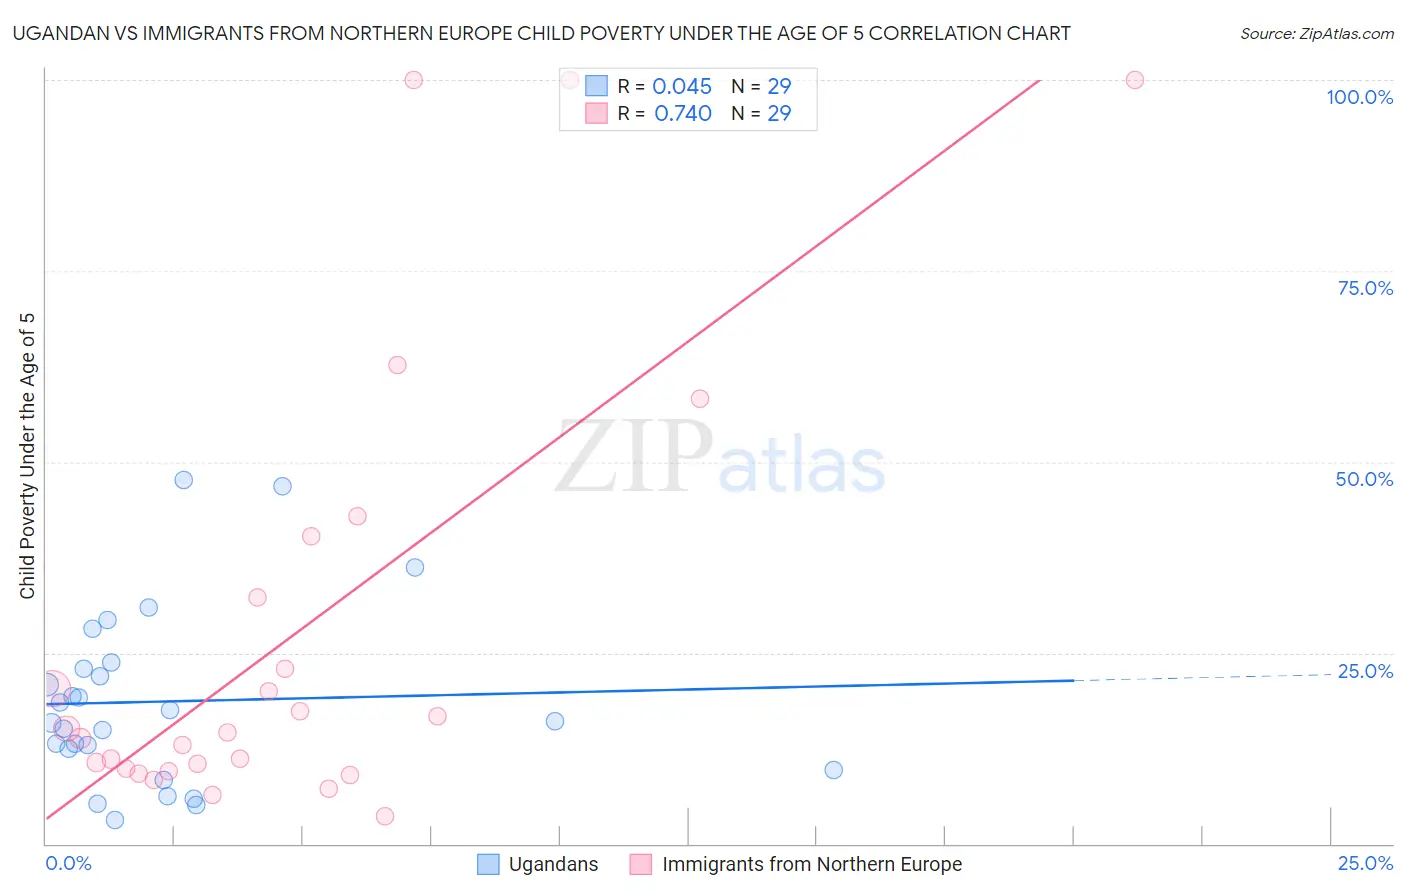 Ugandan vs Immigrants from Northern Europe Child Poverty Under the Age of 5